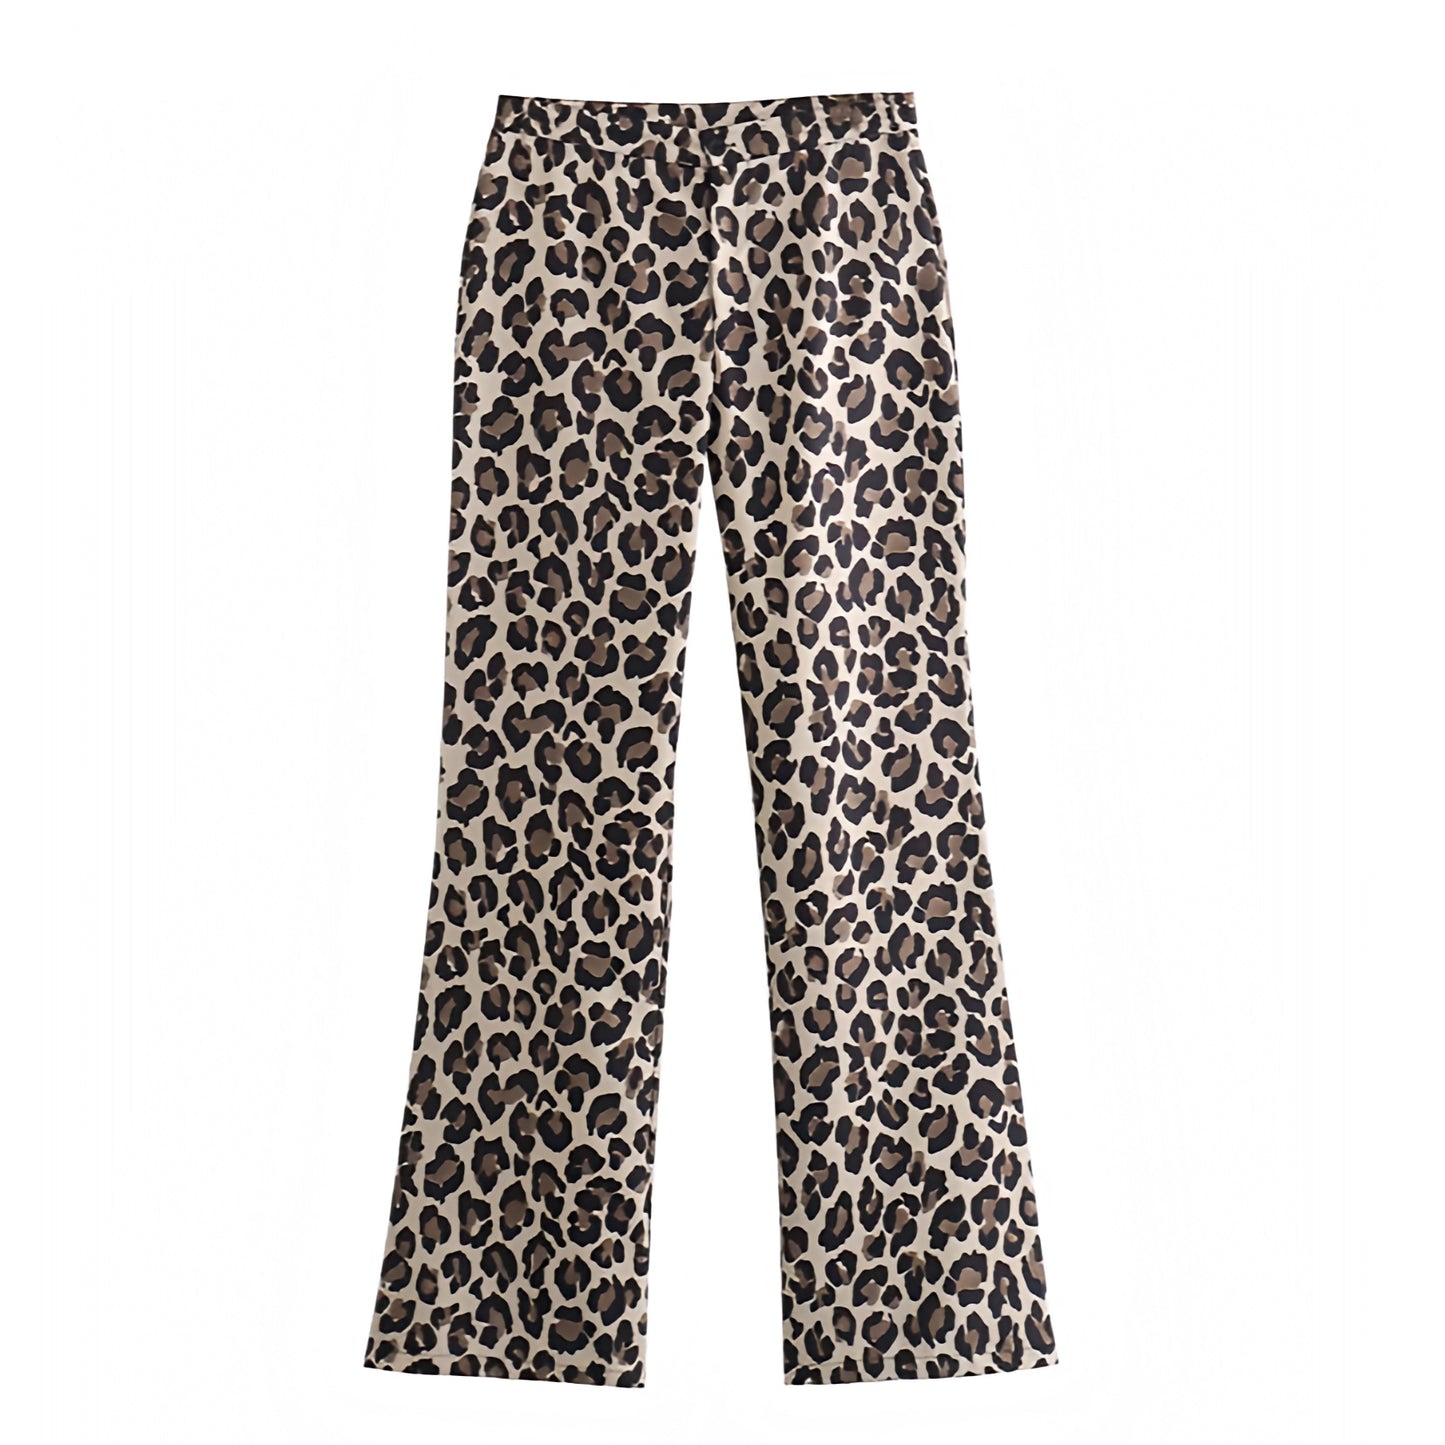 leopard-cheetah-animal-print-patterned-brown-black-multi-color-slim-fit-straight-leg-low-mid-high-rise-waisted-fitted-waist-flare-vintage-retro-trouser-pants-with-pockets-women-ladies-teens-tweens-chic-trendy-spring-2024-summer-casual-feminine-y2k-club-wear-sexy-party-night-out-2000s-office-siren-stockholm-style-zara-aritzia-revolve-reformation-dupe